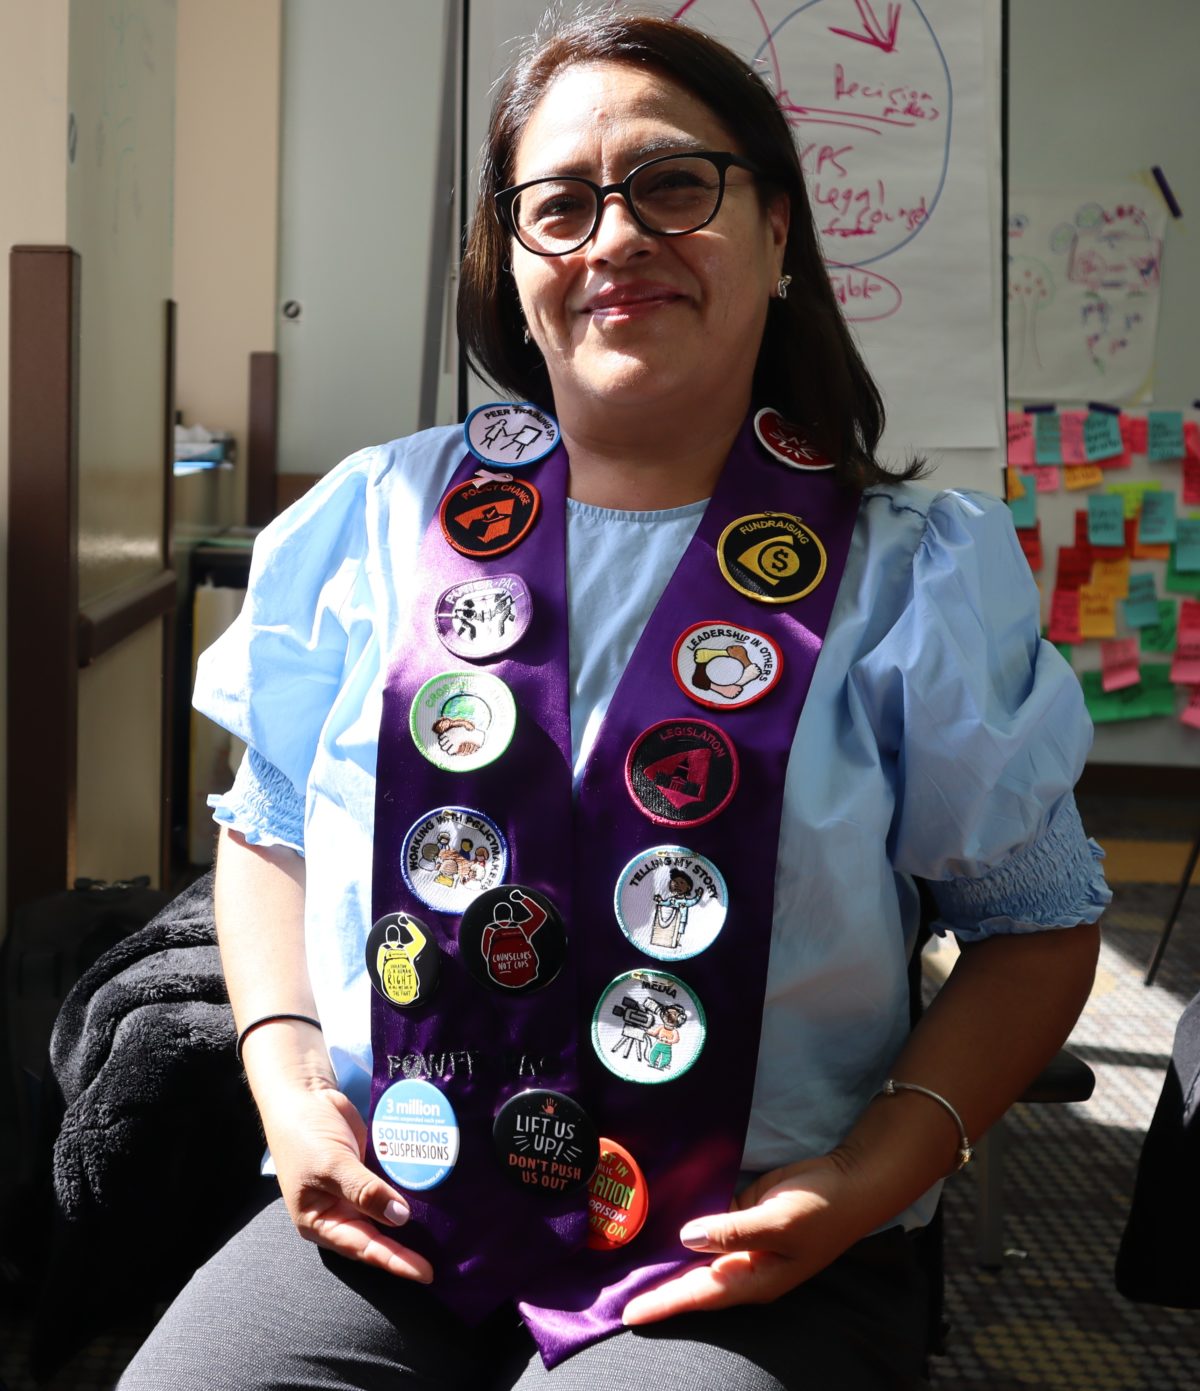 A Latina woman proudly shows off her purple sash covered with Advanced Leader badges